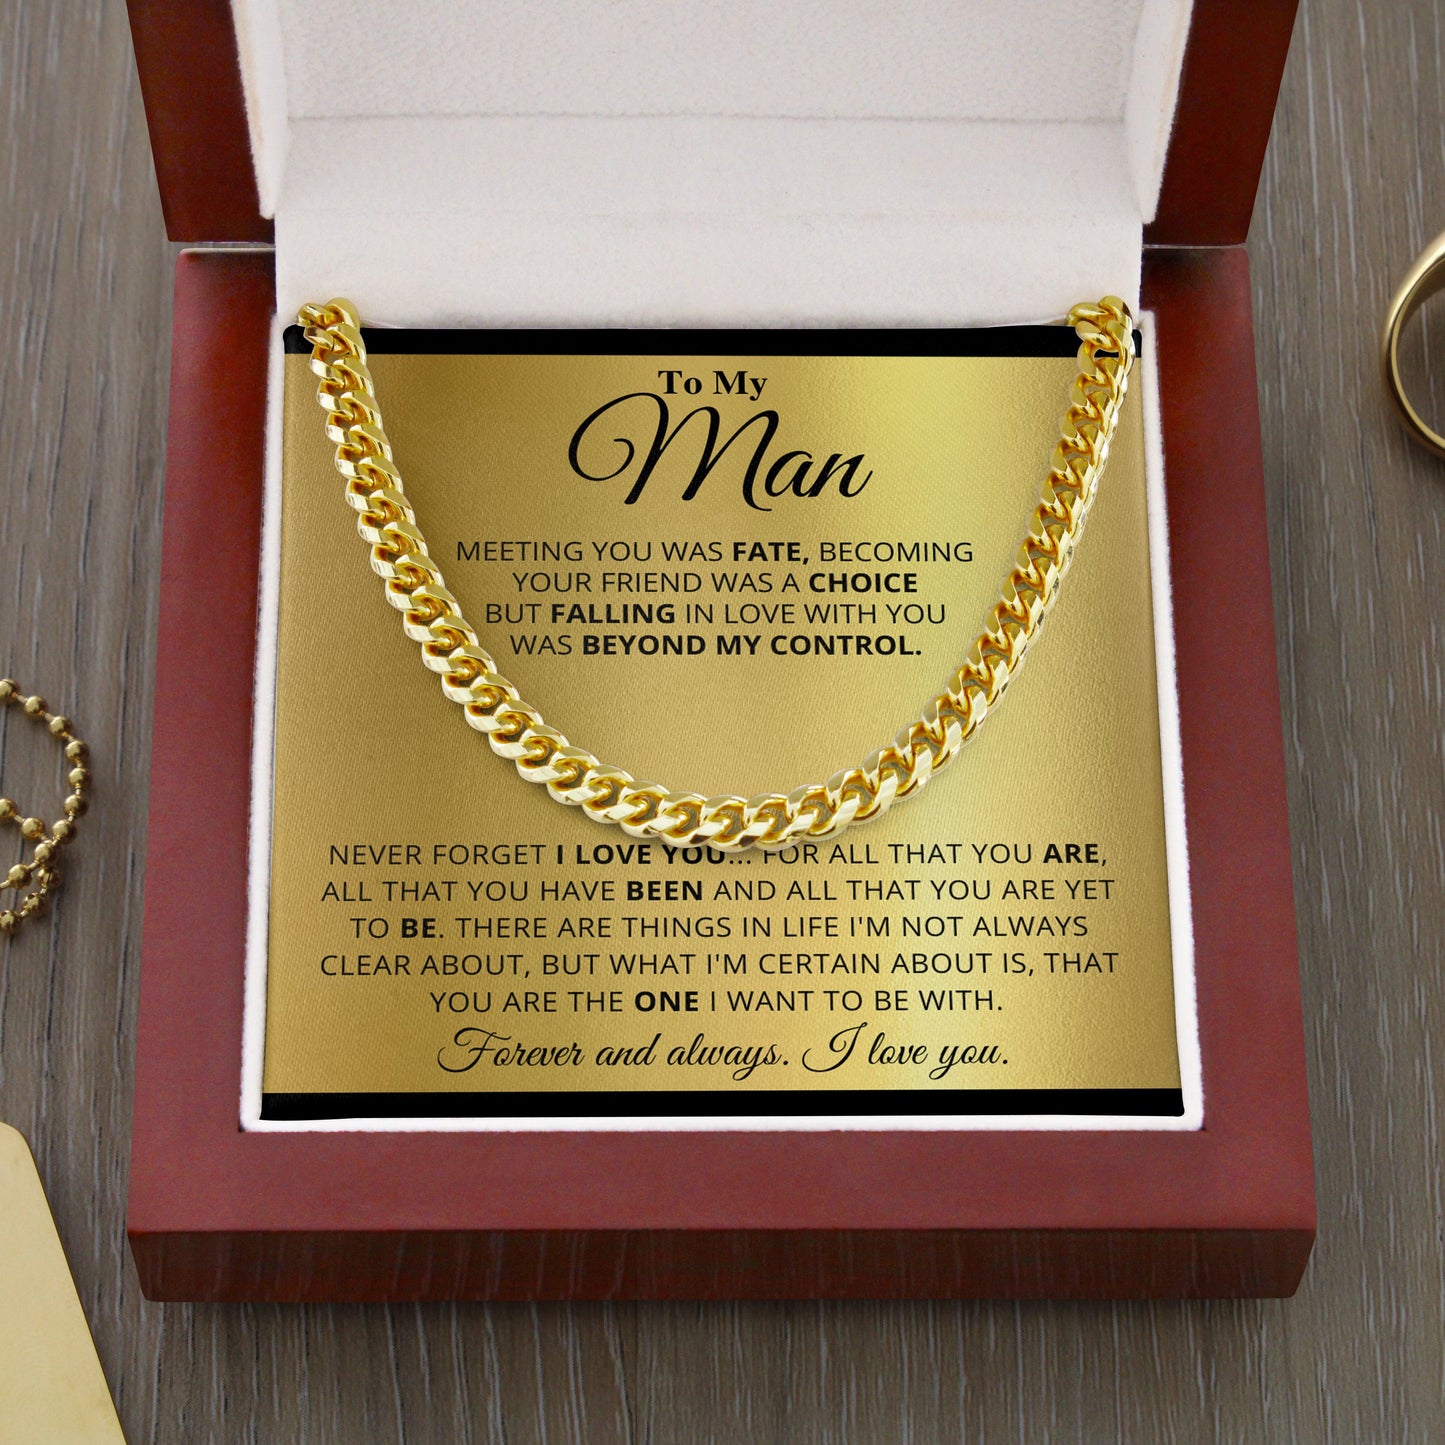 Jewelry gifts My Man - Fate - Cuban Link Chain - Belesmé - Memorable Jewelry Gifts 